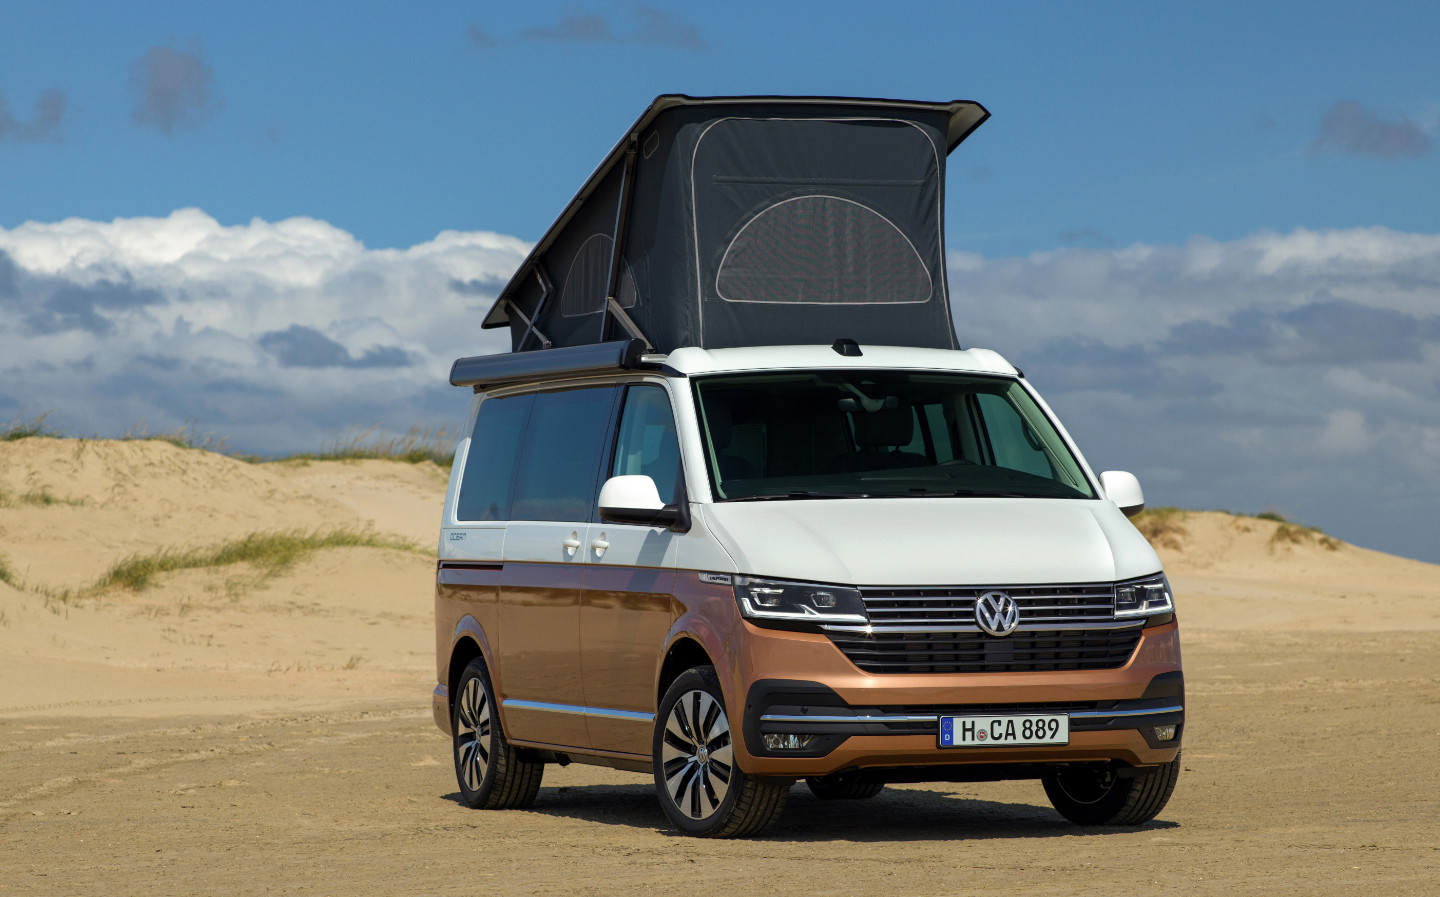 Nick Rufford has taken a VW California Coast for a staycation